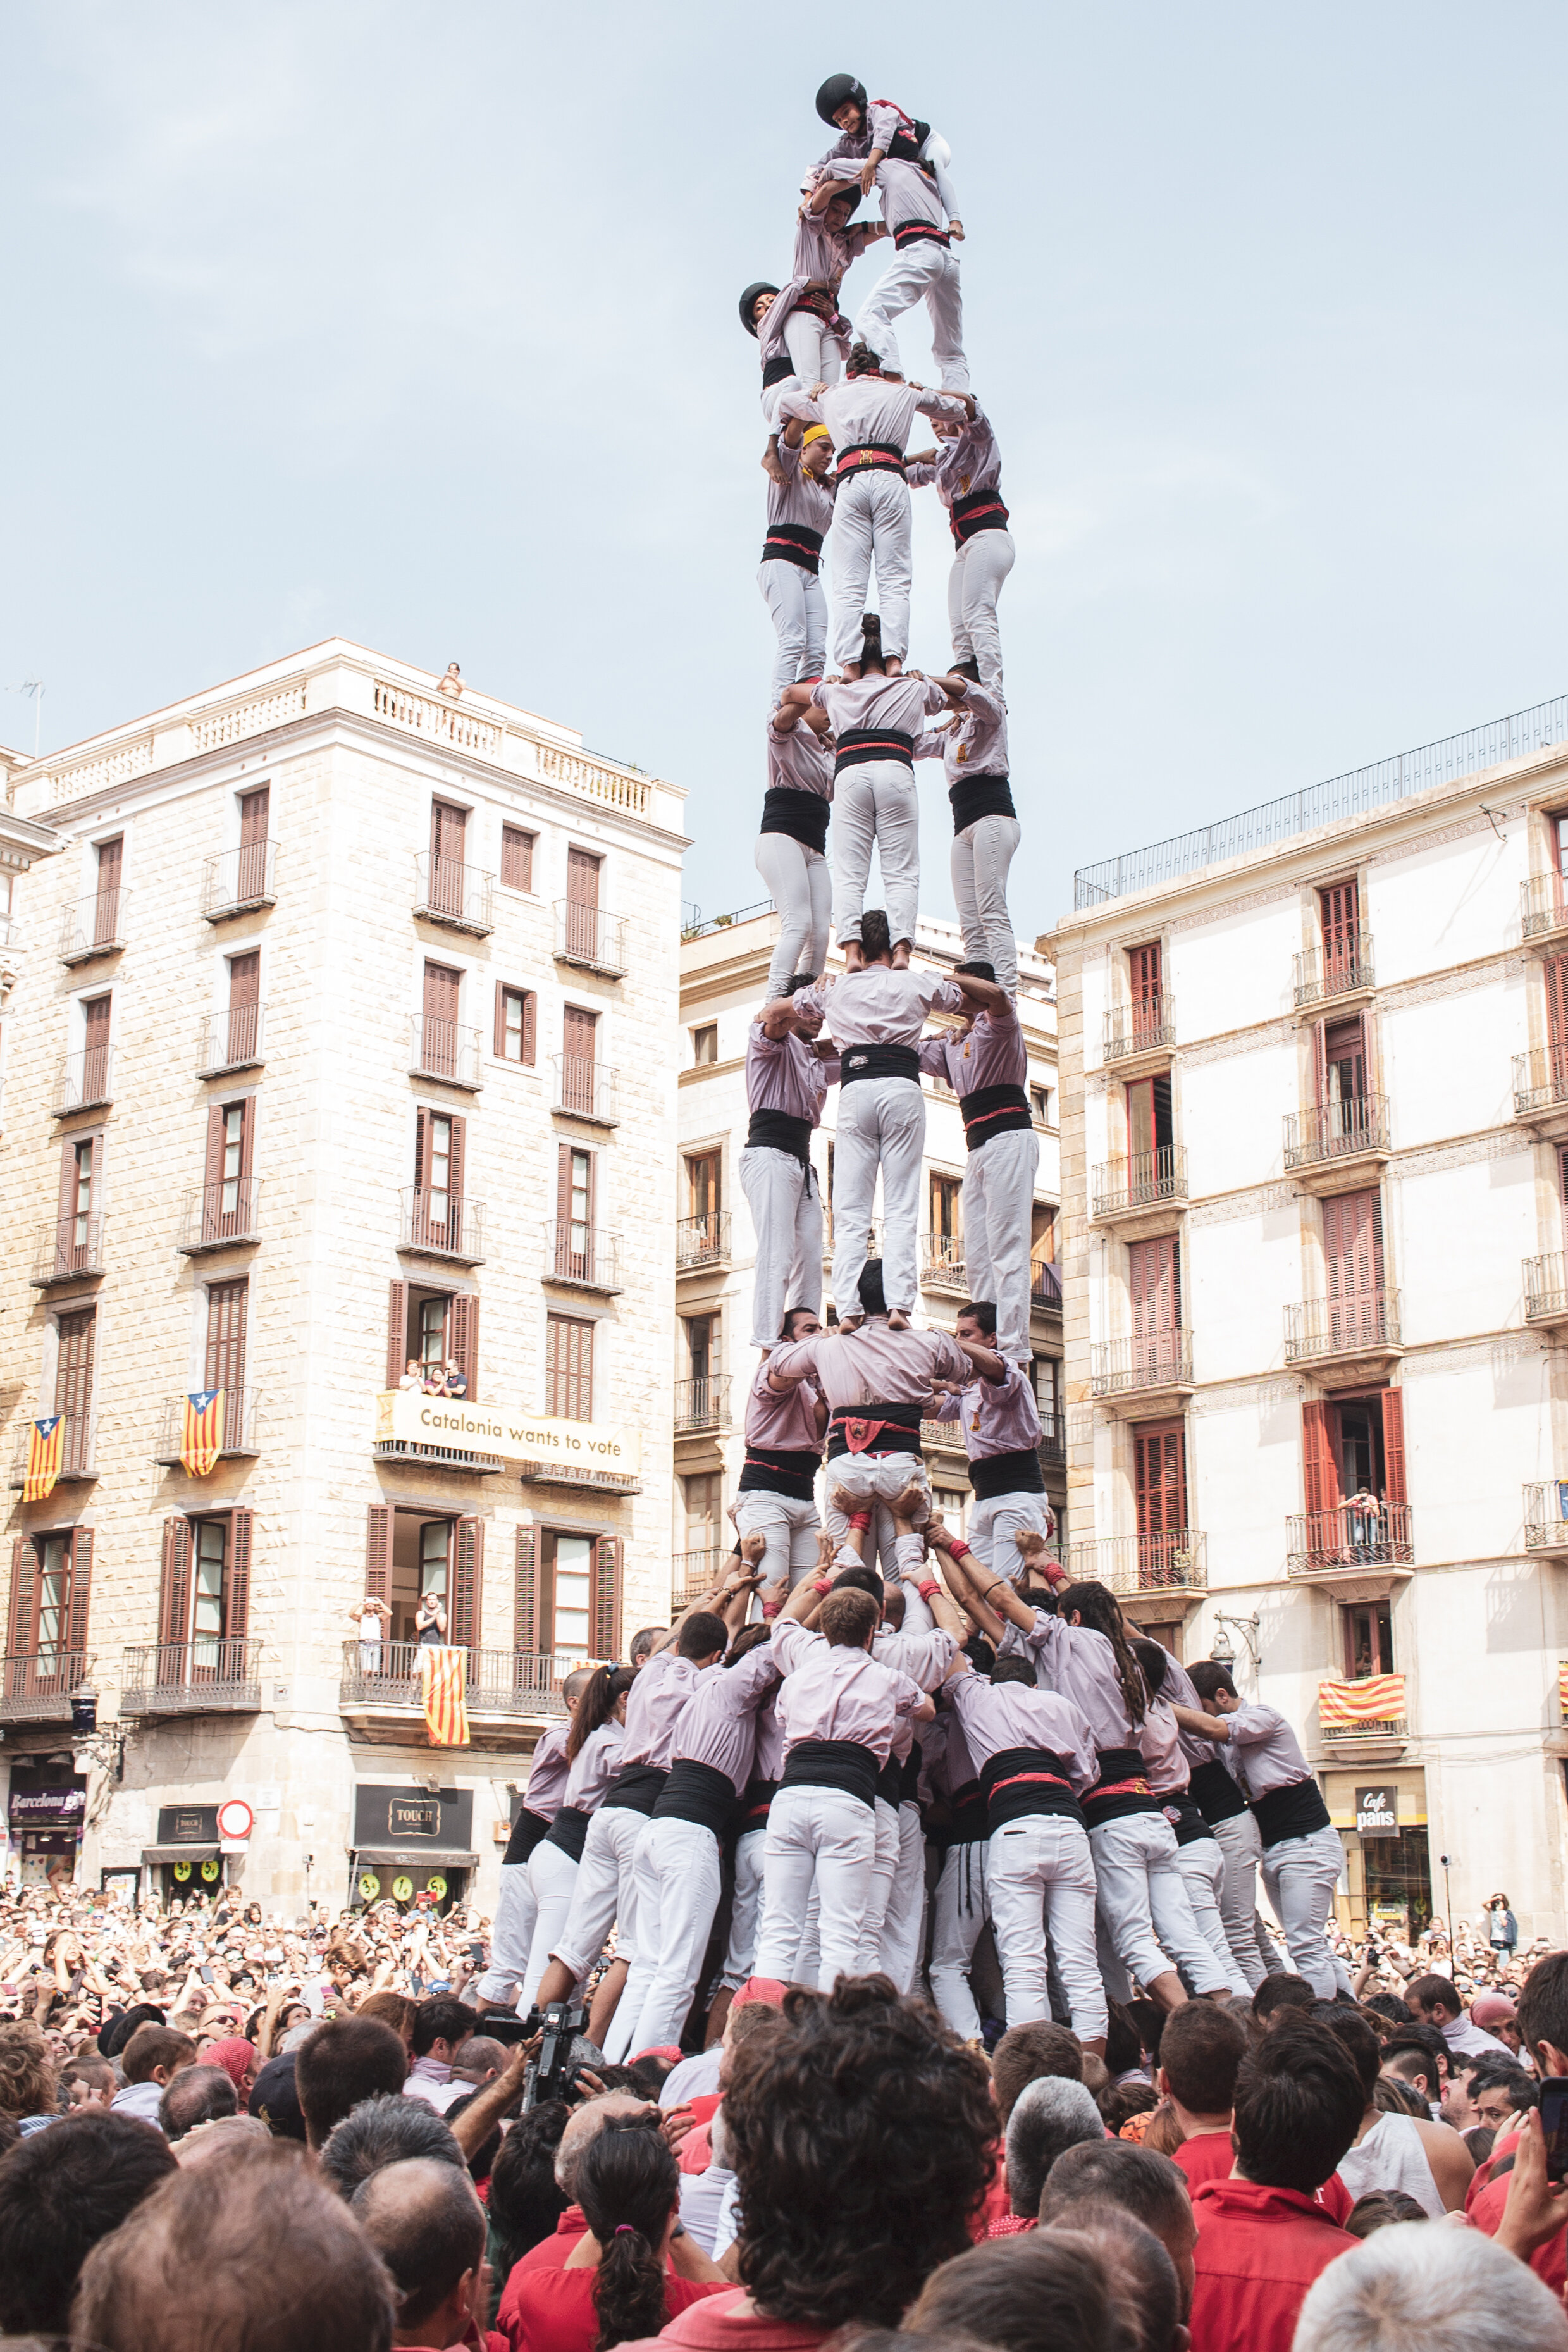  Hit a city festival, like La Mercè in September. Catalans celebrate their culture with parades, dancing, music, and the famous human towers, a tradition that dates back to the 18th century 